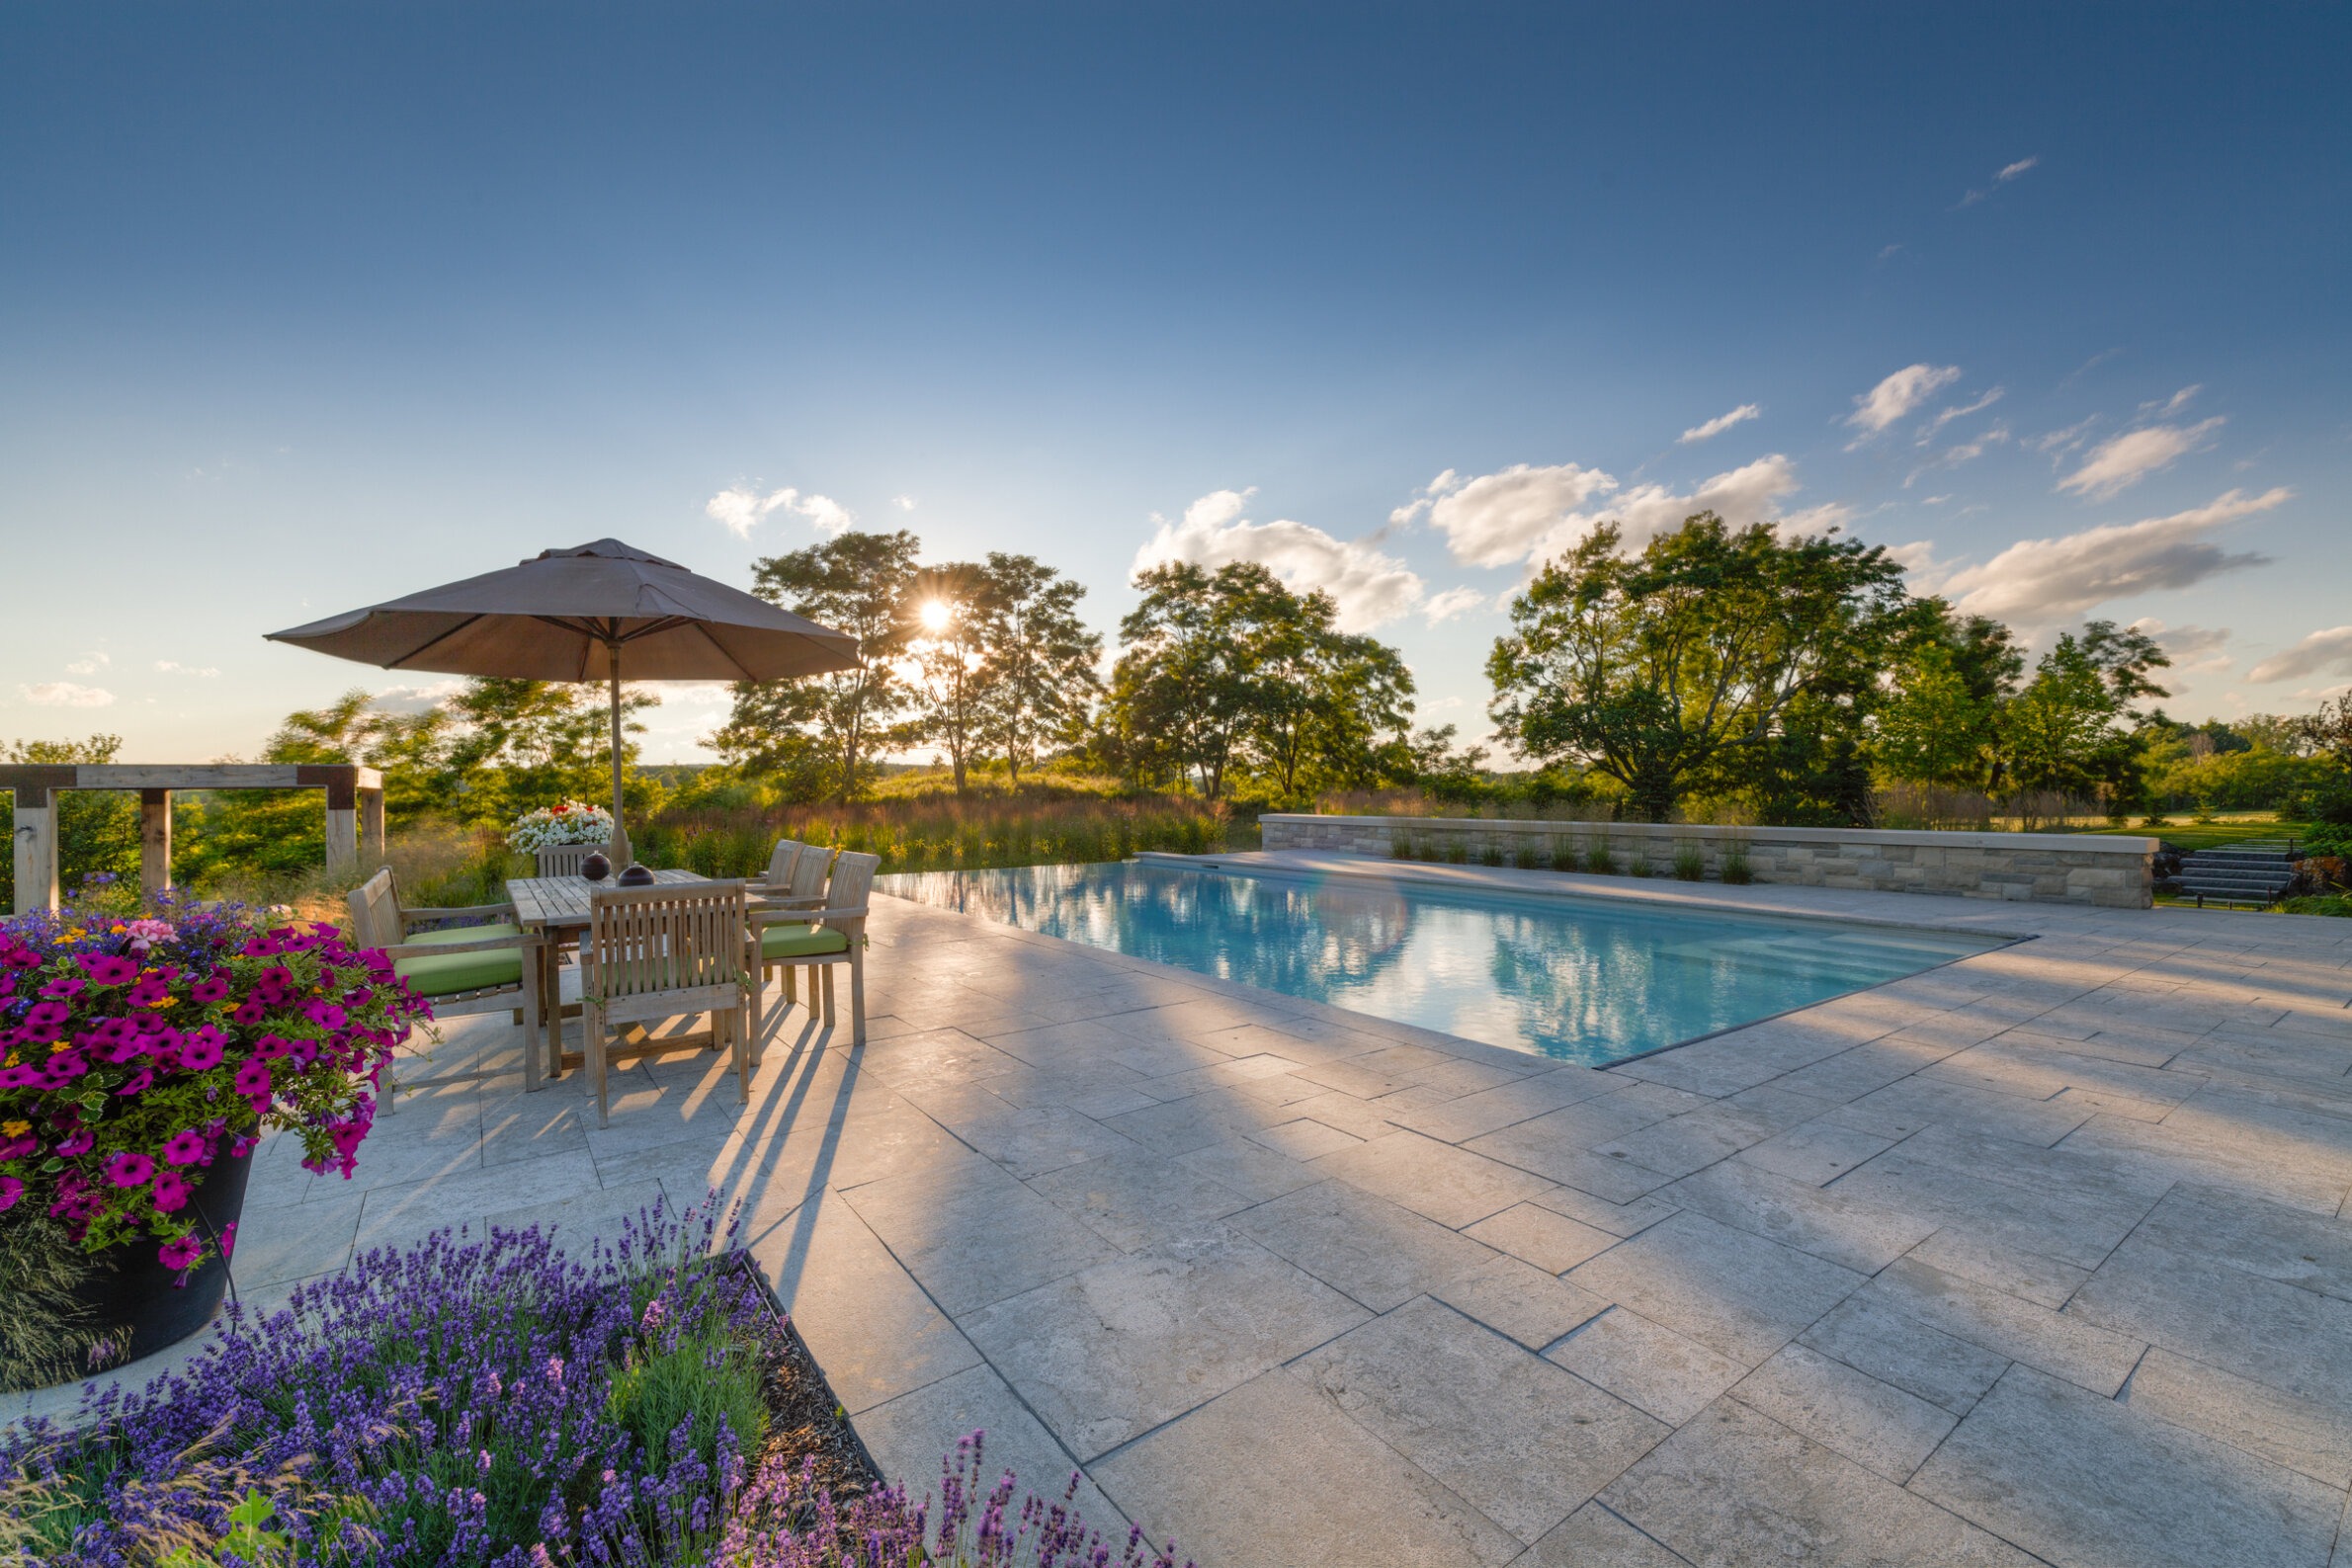 A tranquil outdoor setting with a swimming pool, patio furniture under an umbrella, blooming flowers, and trees illuminated by a sunset.